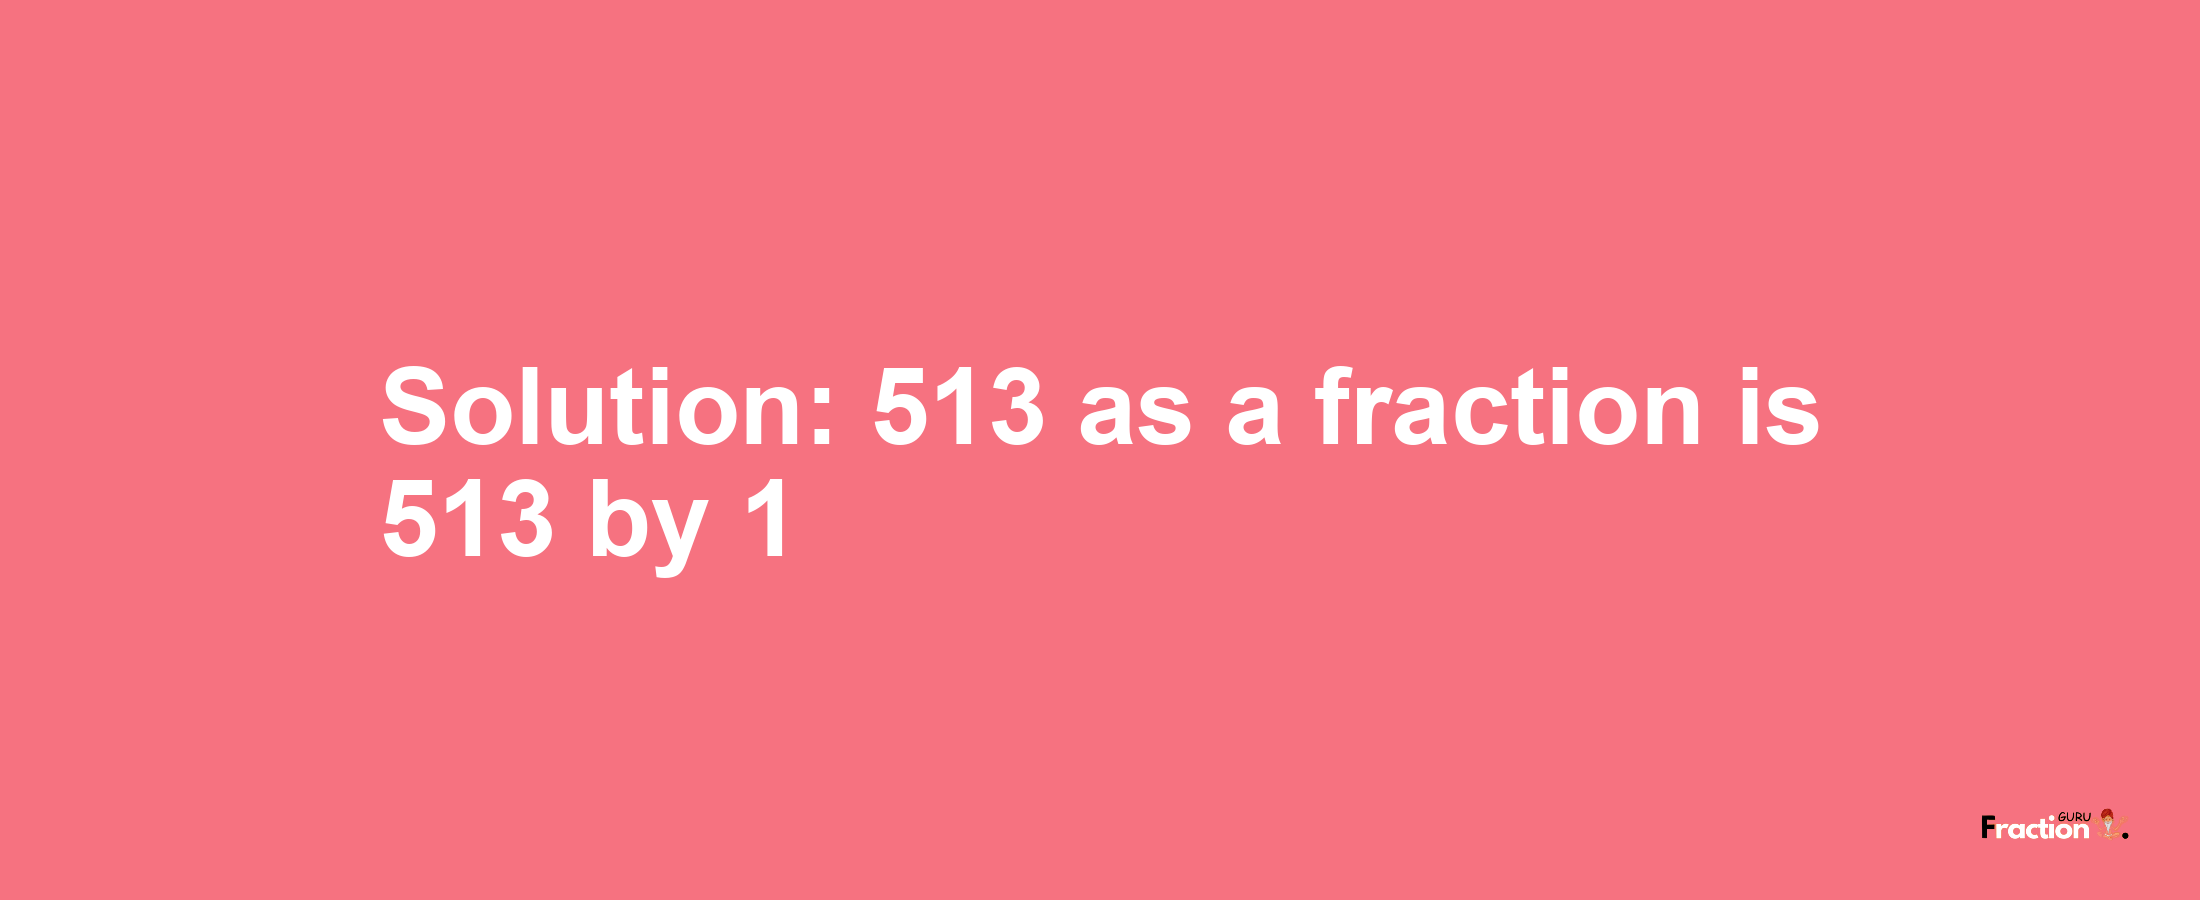 Solution:513 as a fraction is 513/1